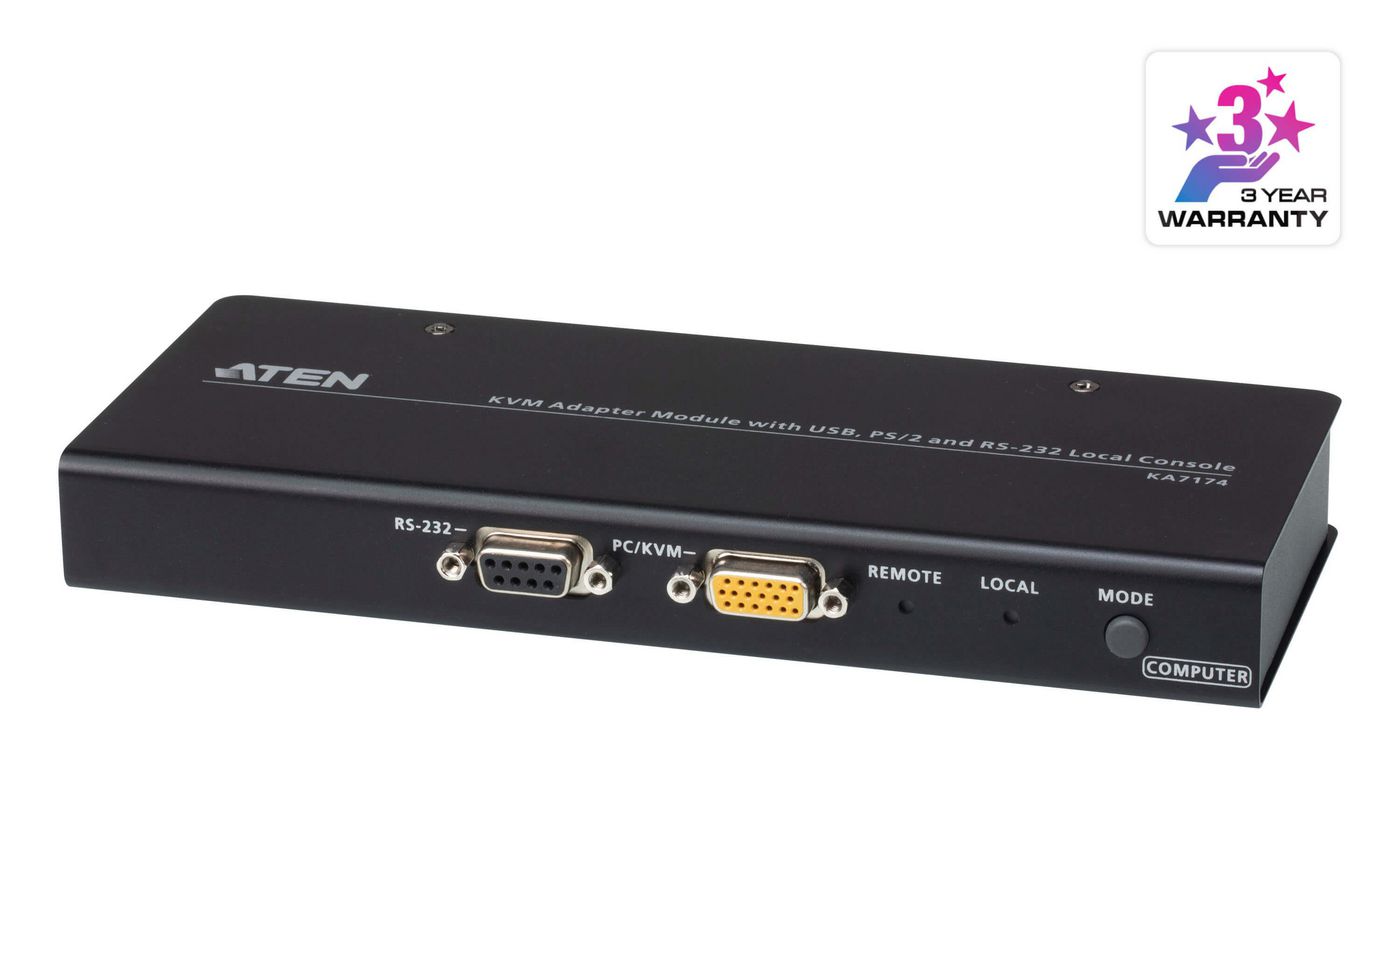 USB VGA KVM Adapter Module with USB PS/2 and RS-232 Local Console